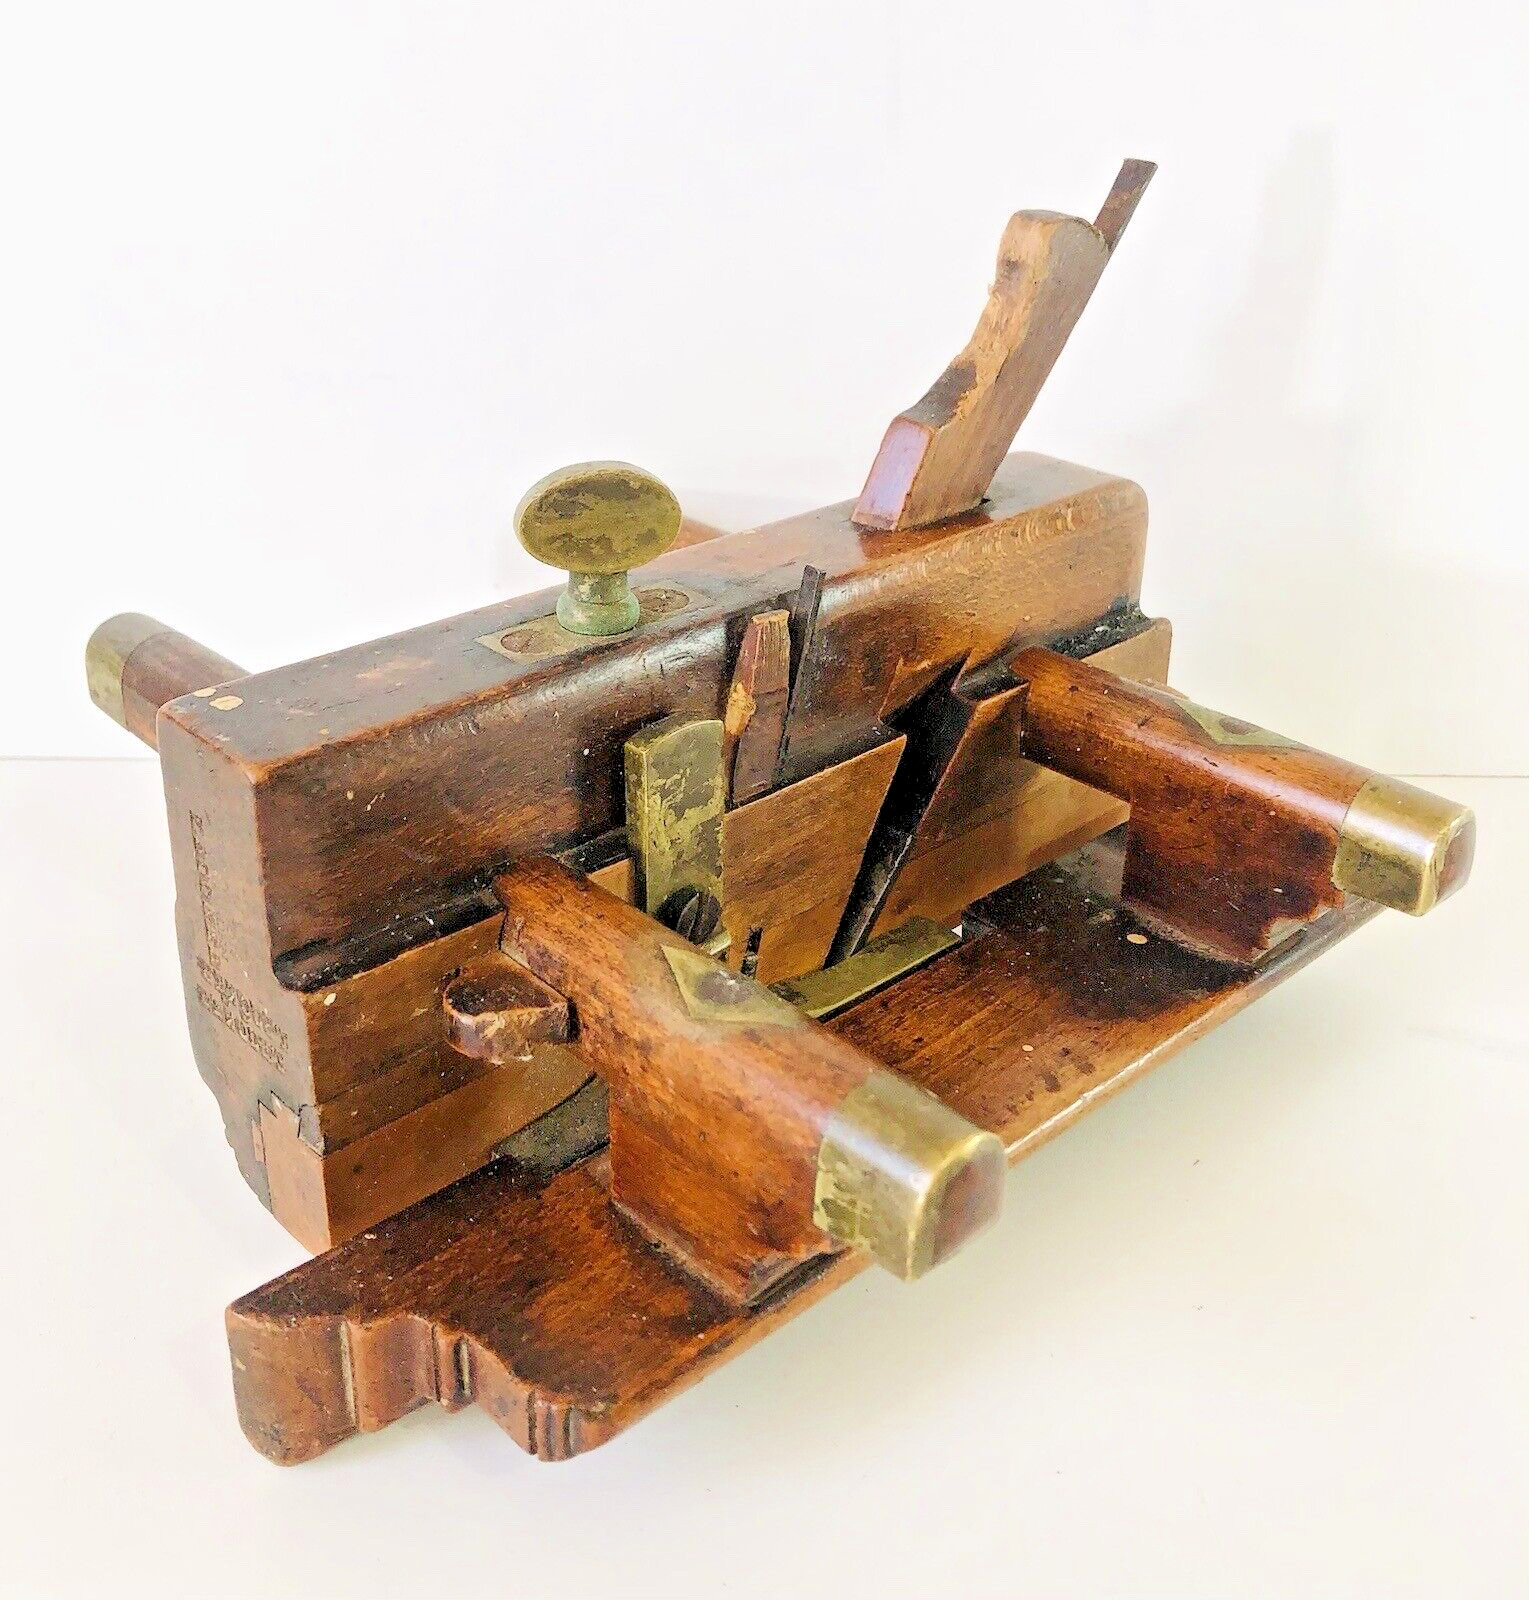 Moseley & Son London, Wooden Moulding Fillister Plane, Antique Woodworking Tool